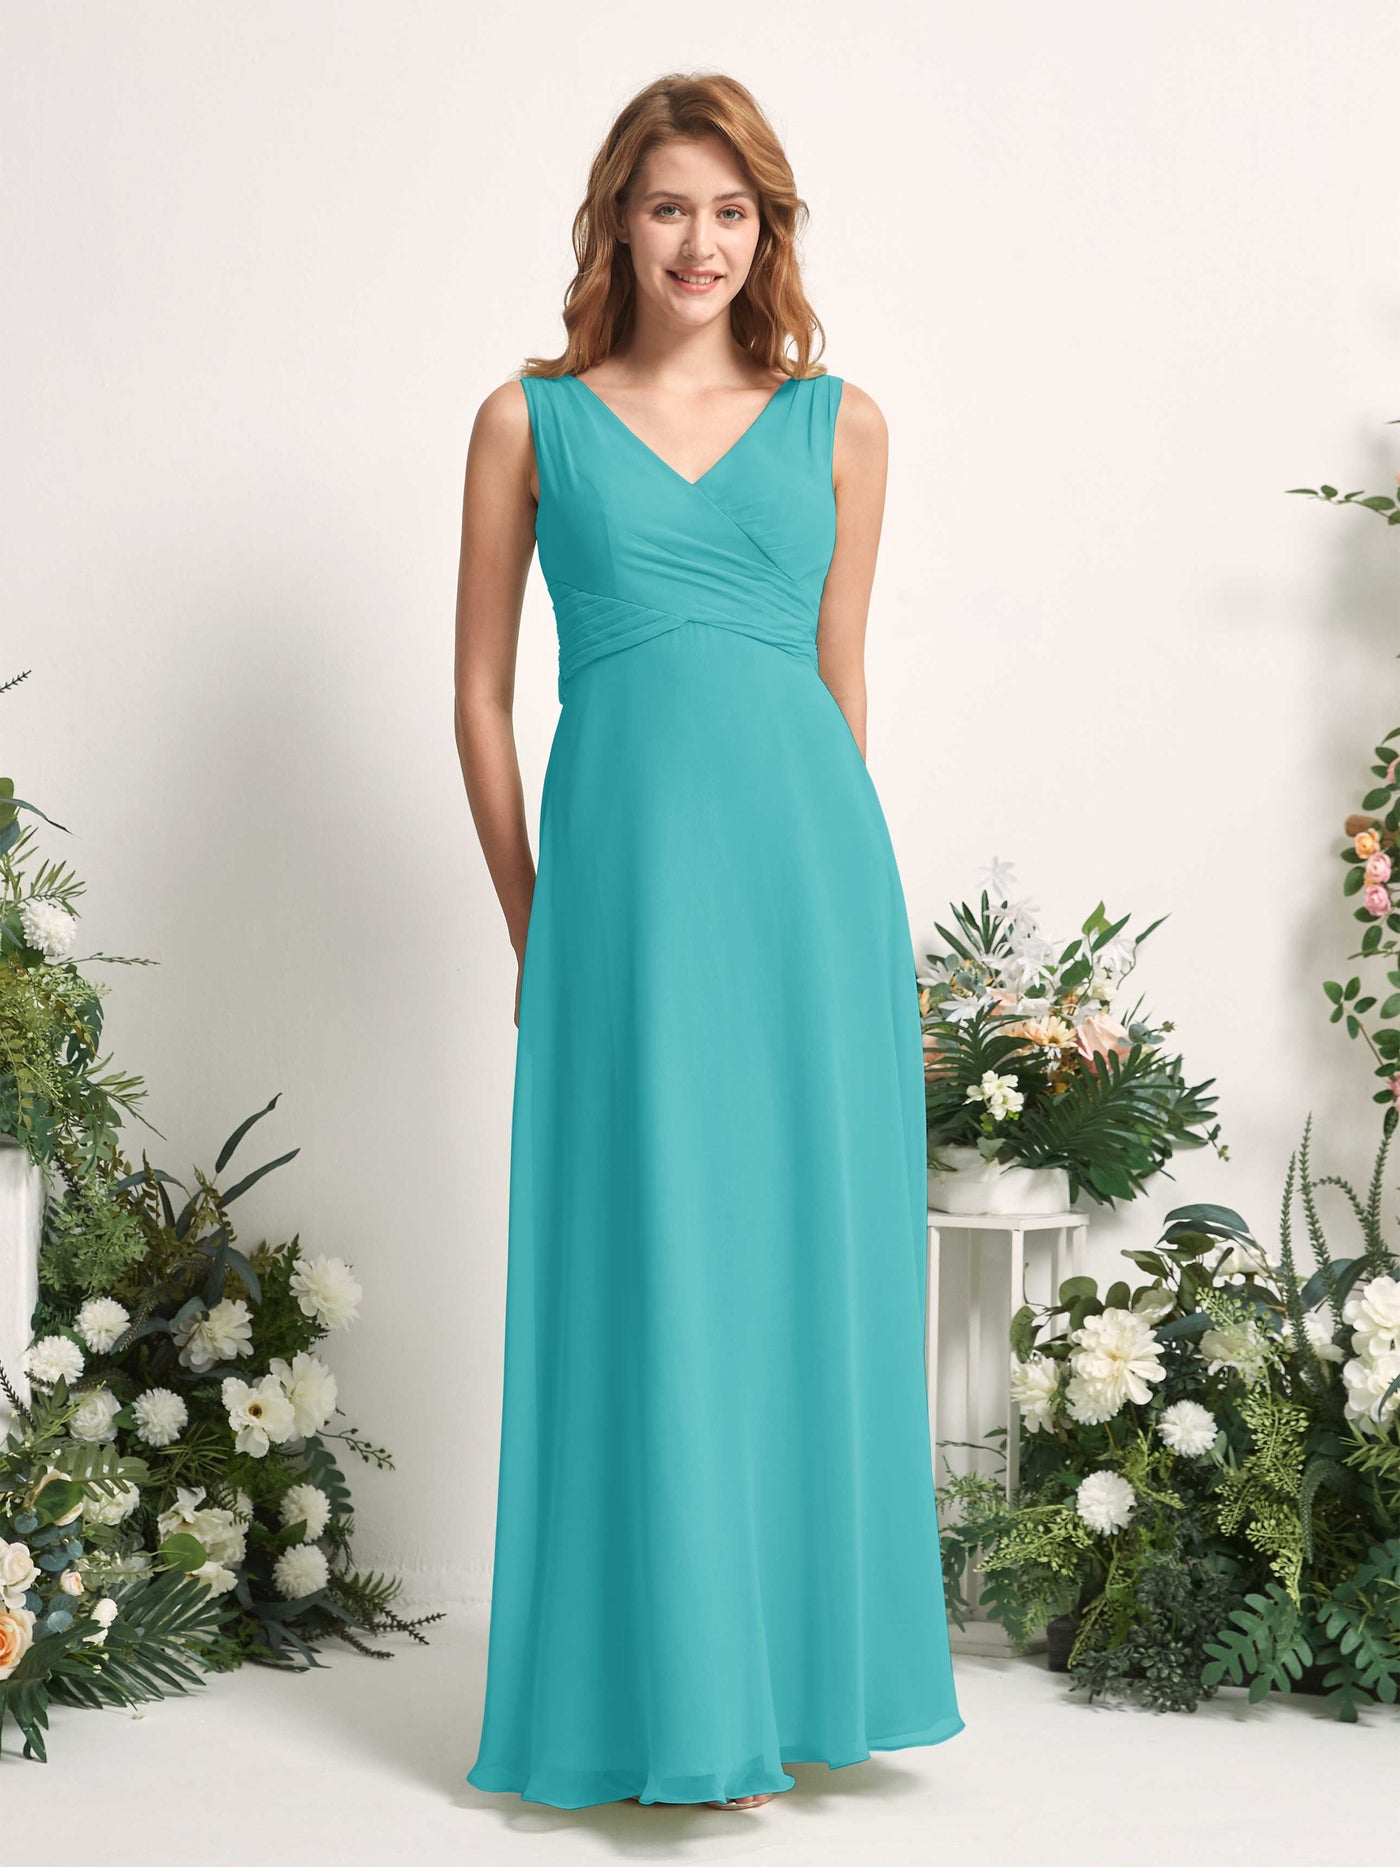 Bridesmaid Dress A-line Chiffon Straps Full Length Sleeveless Wedding Party Dress - Turquoise (81227323)#color_turquoise